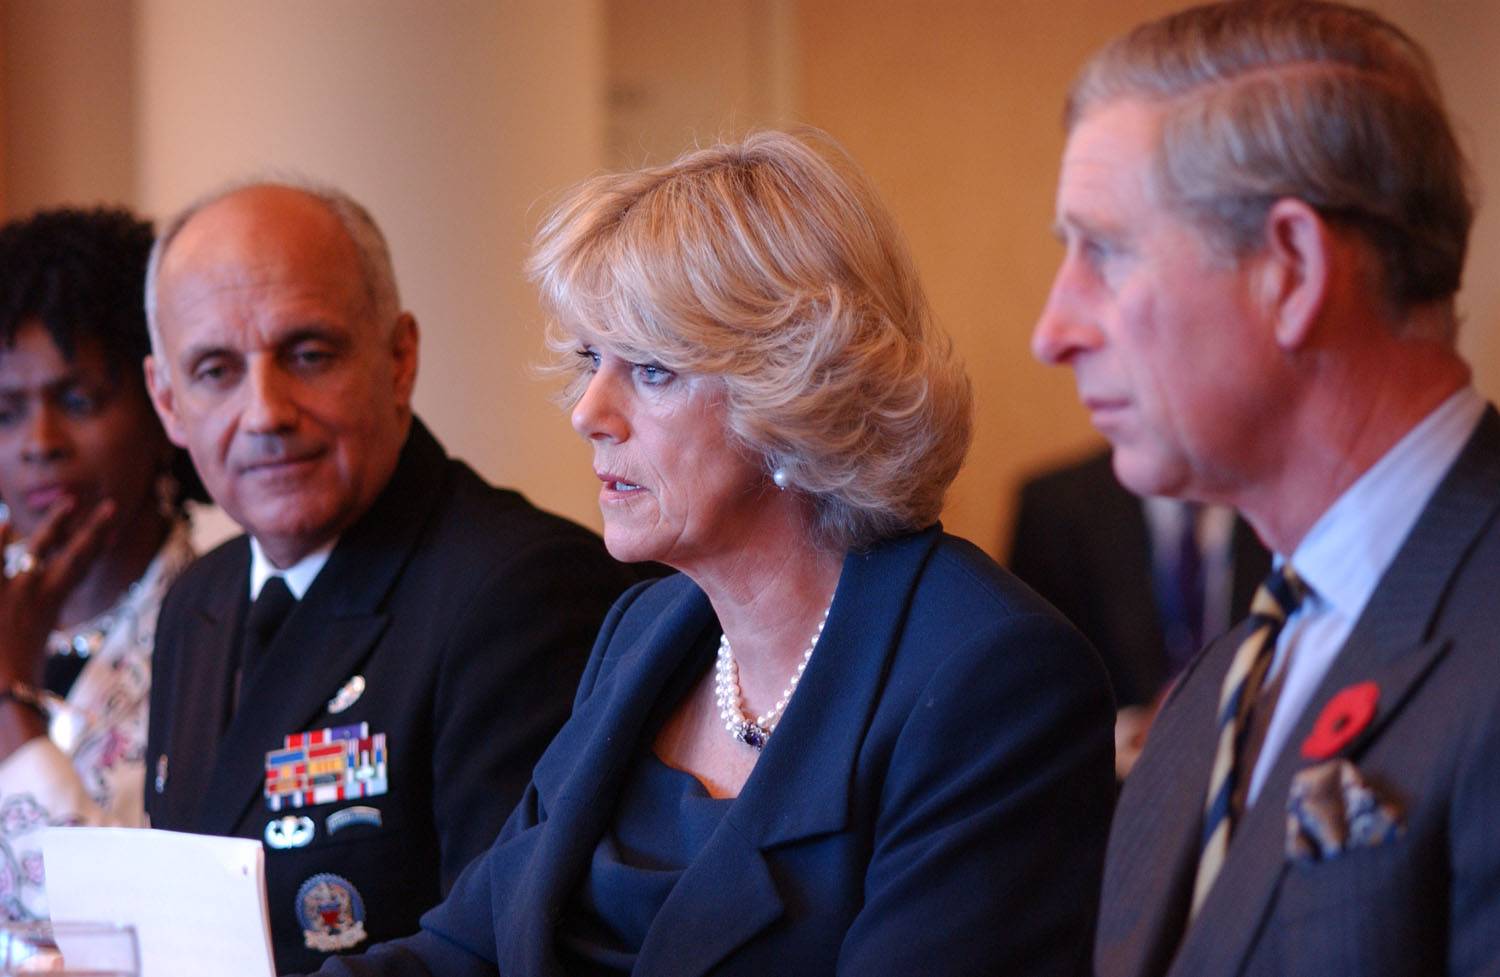 Camilla speaks to a group of osteoporosis researchers and leaders in the Clinical Center medical board room as Prince Charles, seated beside her, listens. Camilla’s interest in the medical condition, which afflicted her mother and grandmother, prompted the royal couple’s visit to NIH as a part of their eight-day US tour.